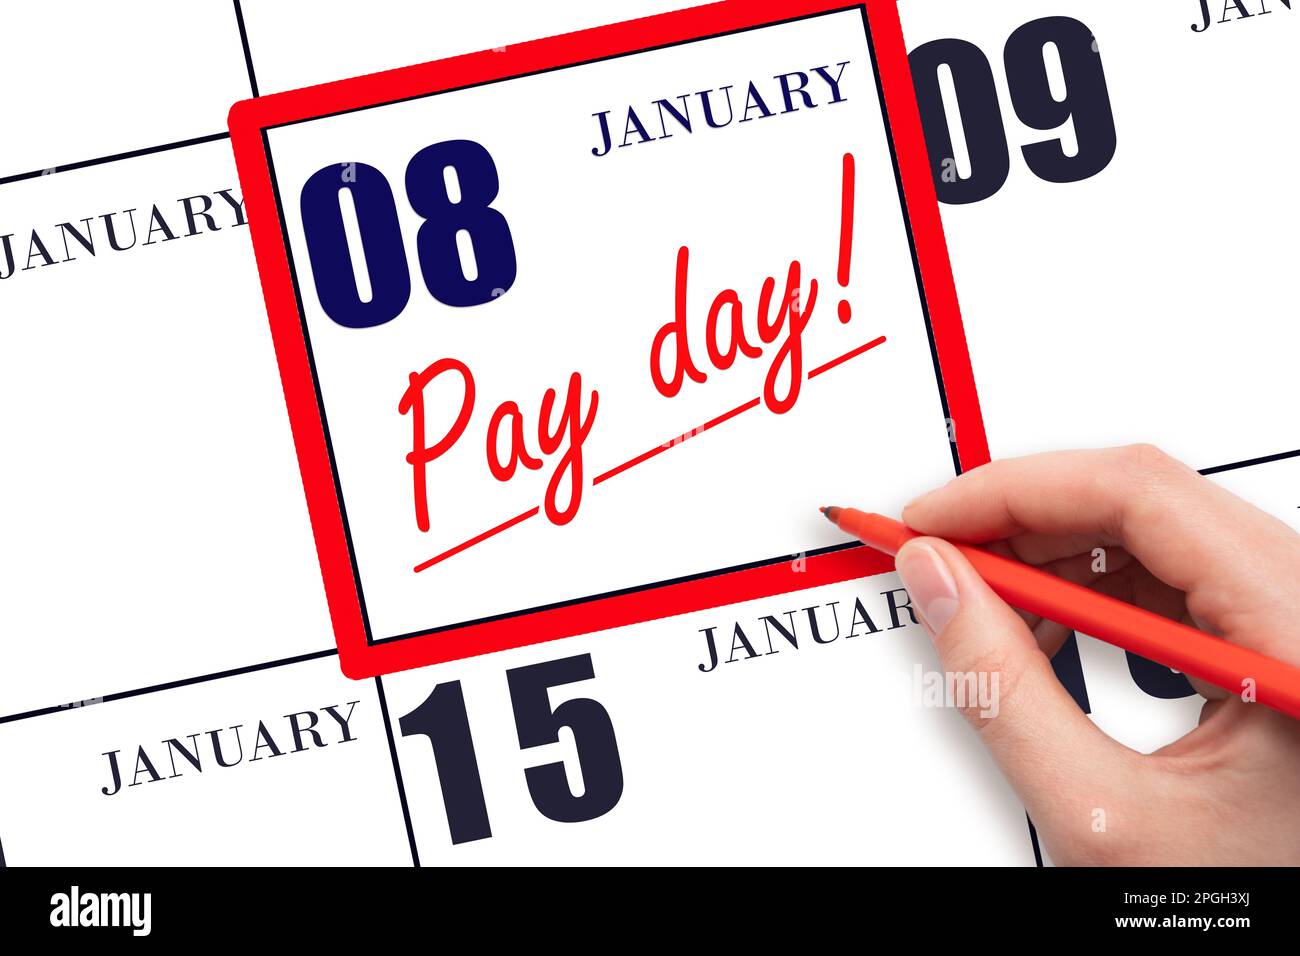 8th day of January. Hand writing text PAY DATE on calendar date January 8 and underline it. Payment due date. Reminder concept of payment. Winter mont Stock Photo